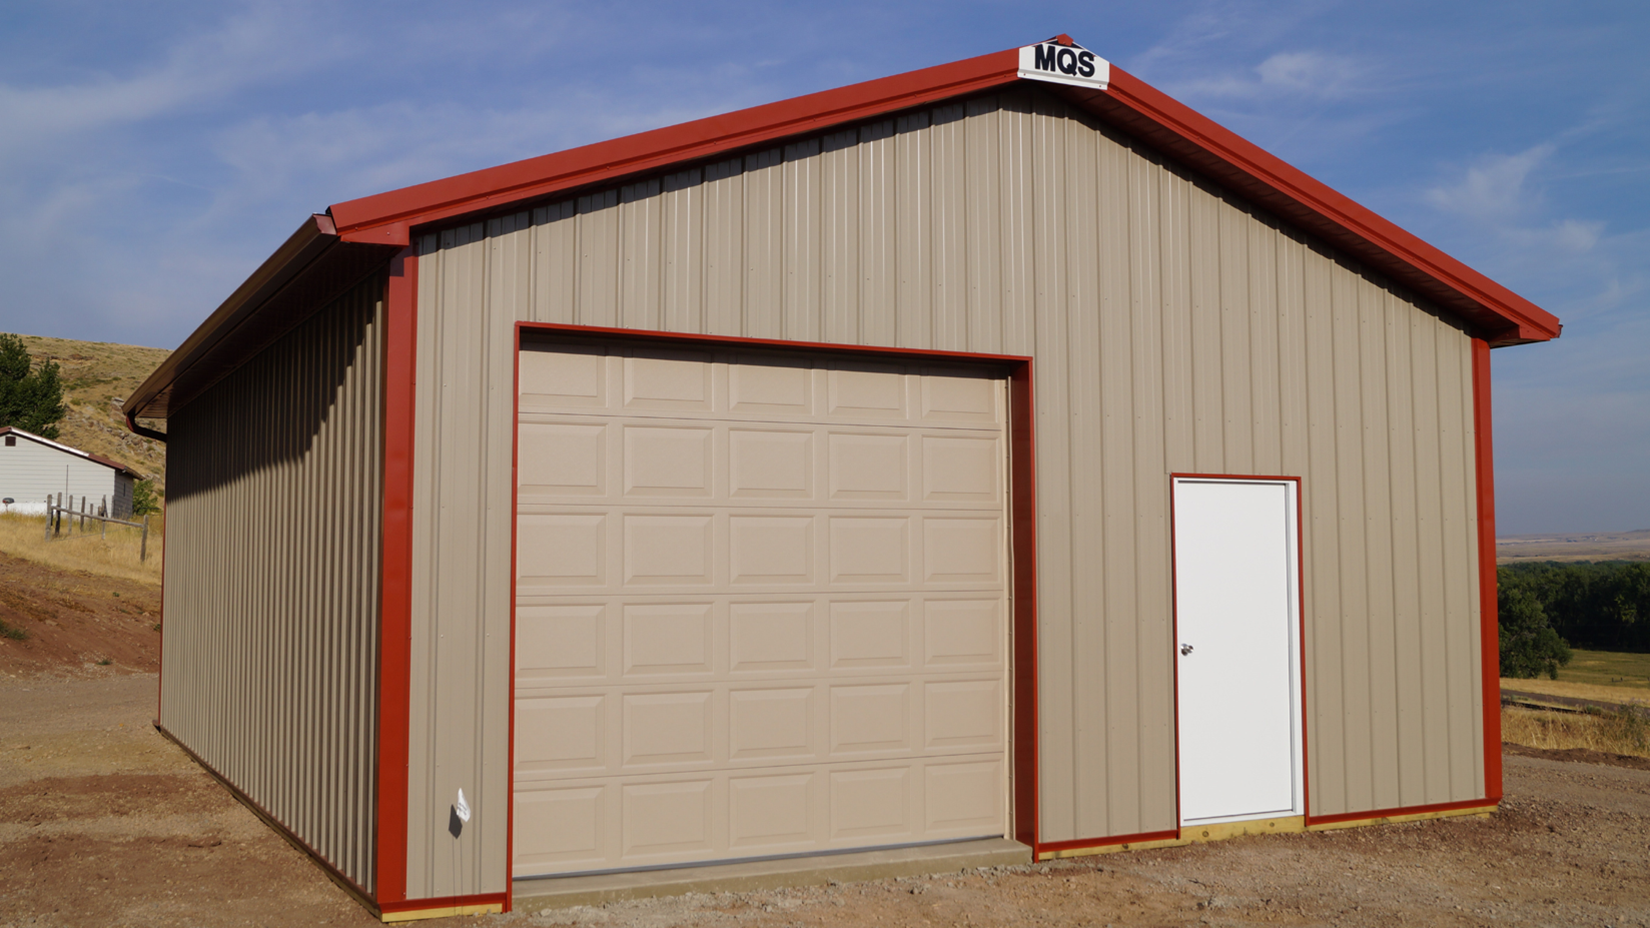 5 Factors to Consider When Estimating the Price of Your New Pole Barn